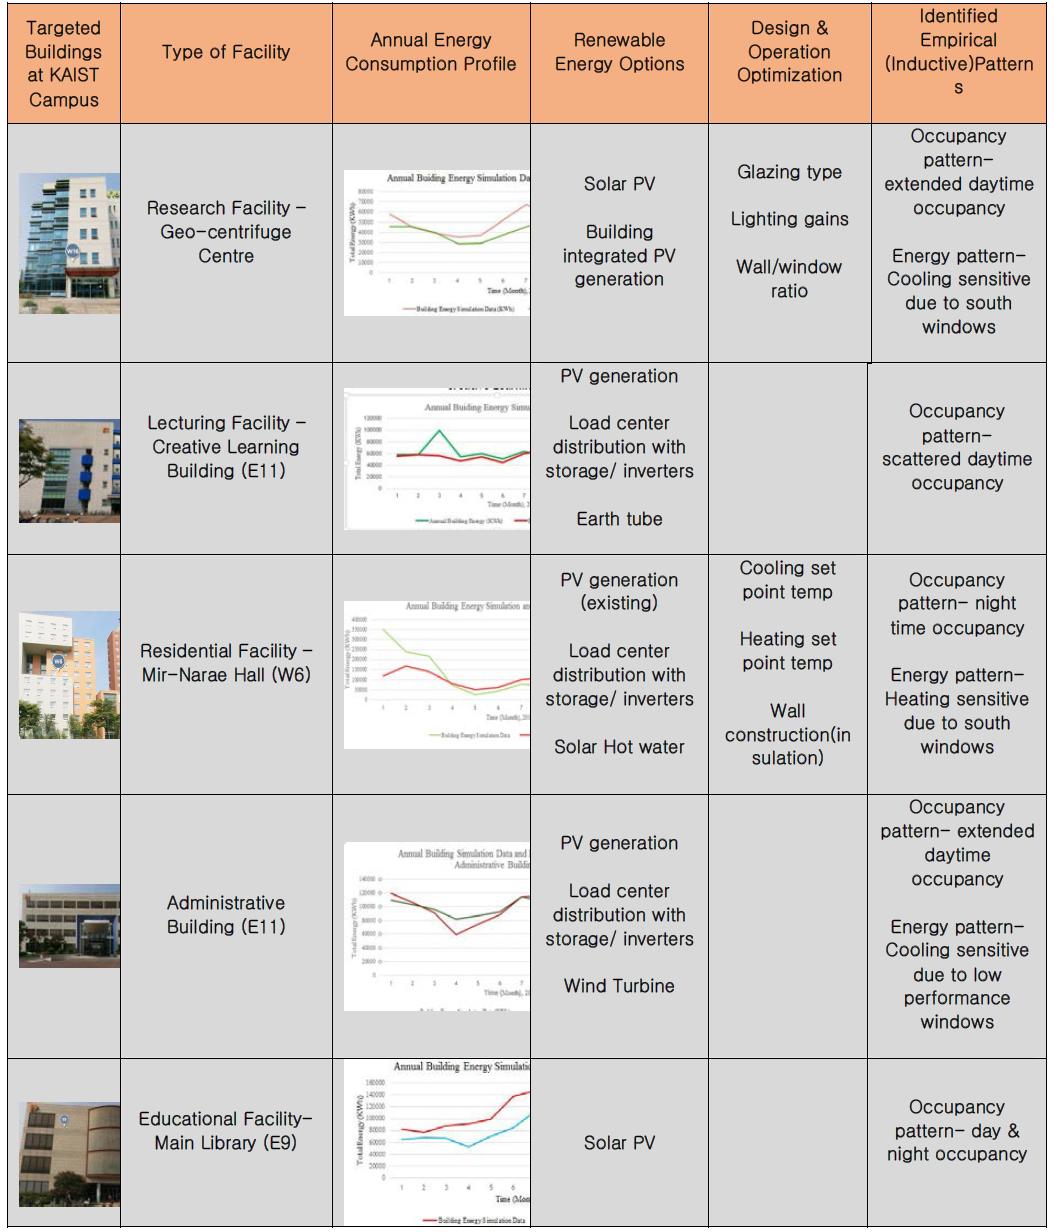 selected KAIST campus buildings for energy sensitivity analysis and inductive energy pattern identification